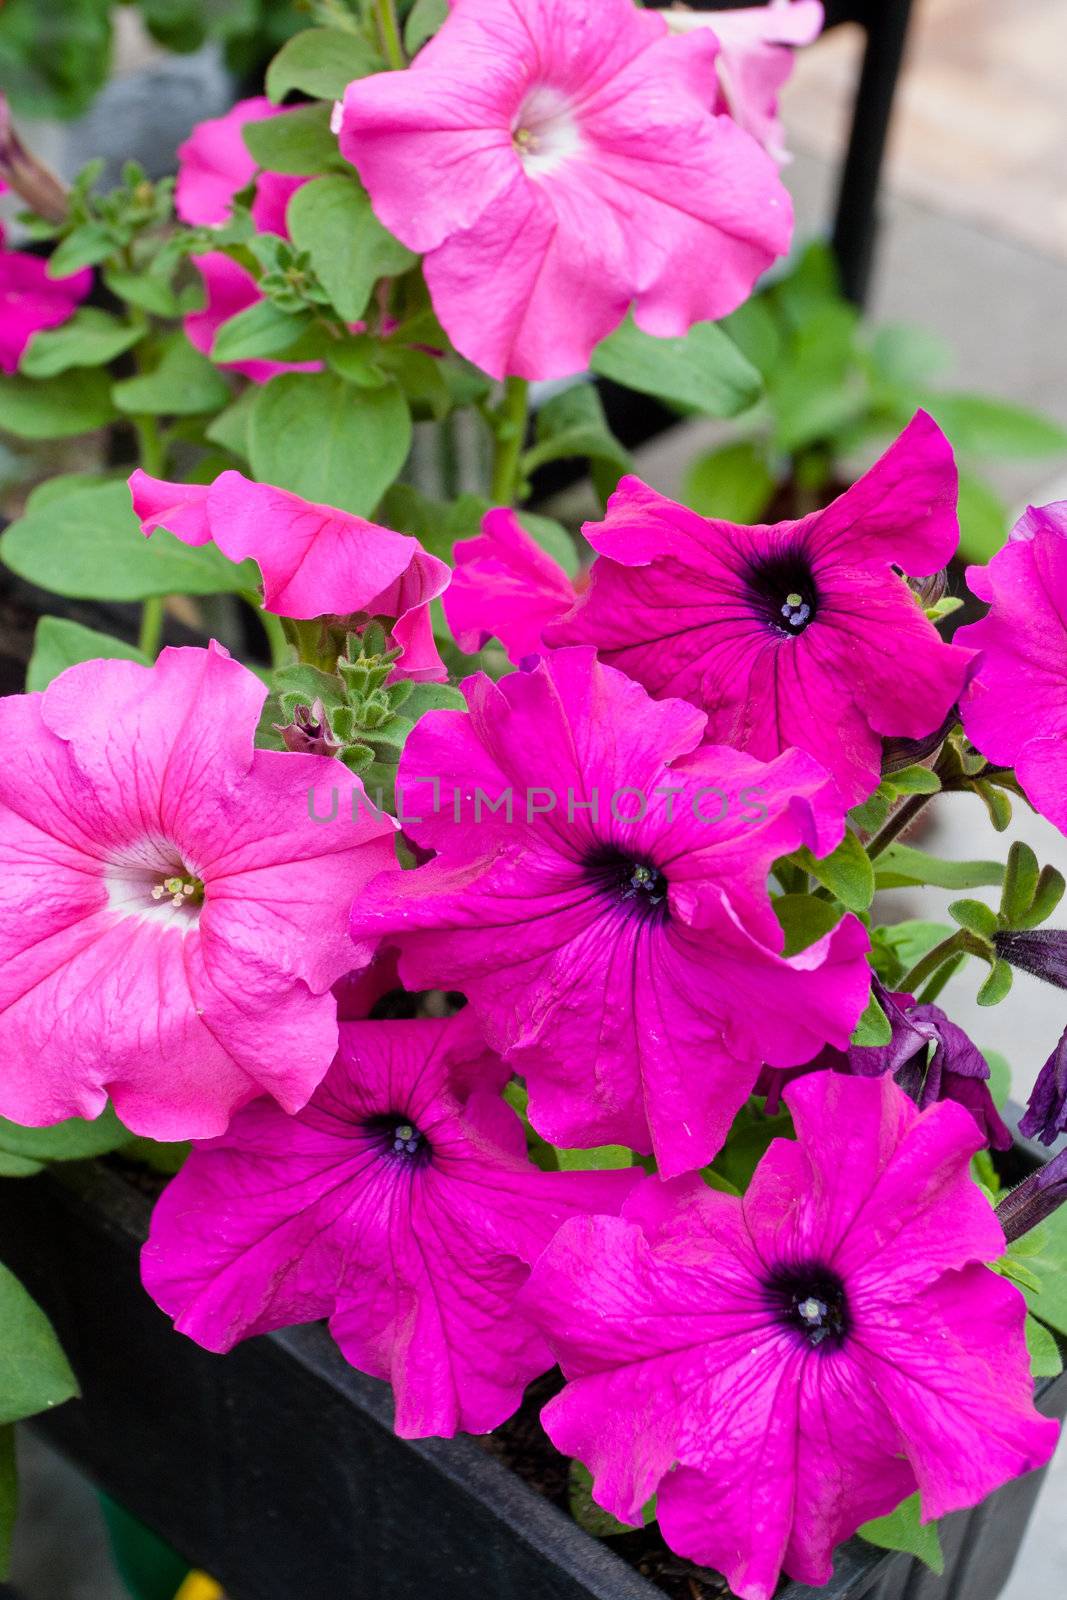 Petunia is a widely cultivated genus of flowering plants of South American origin